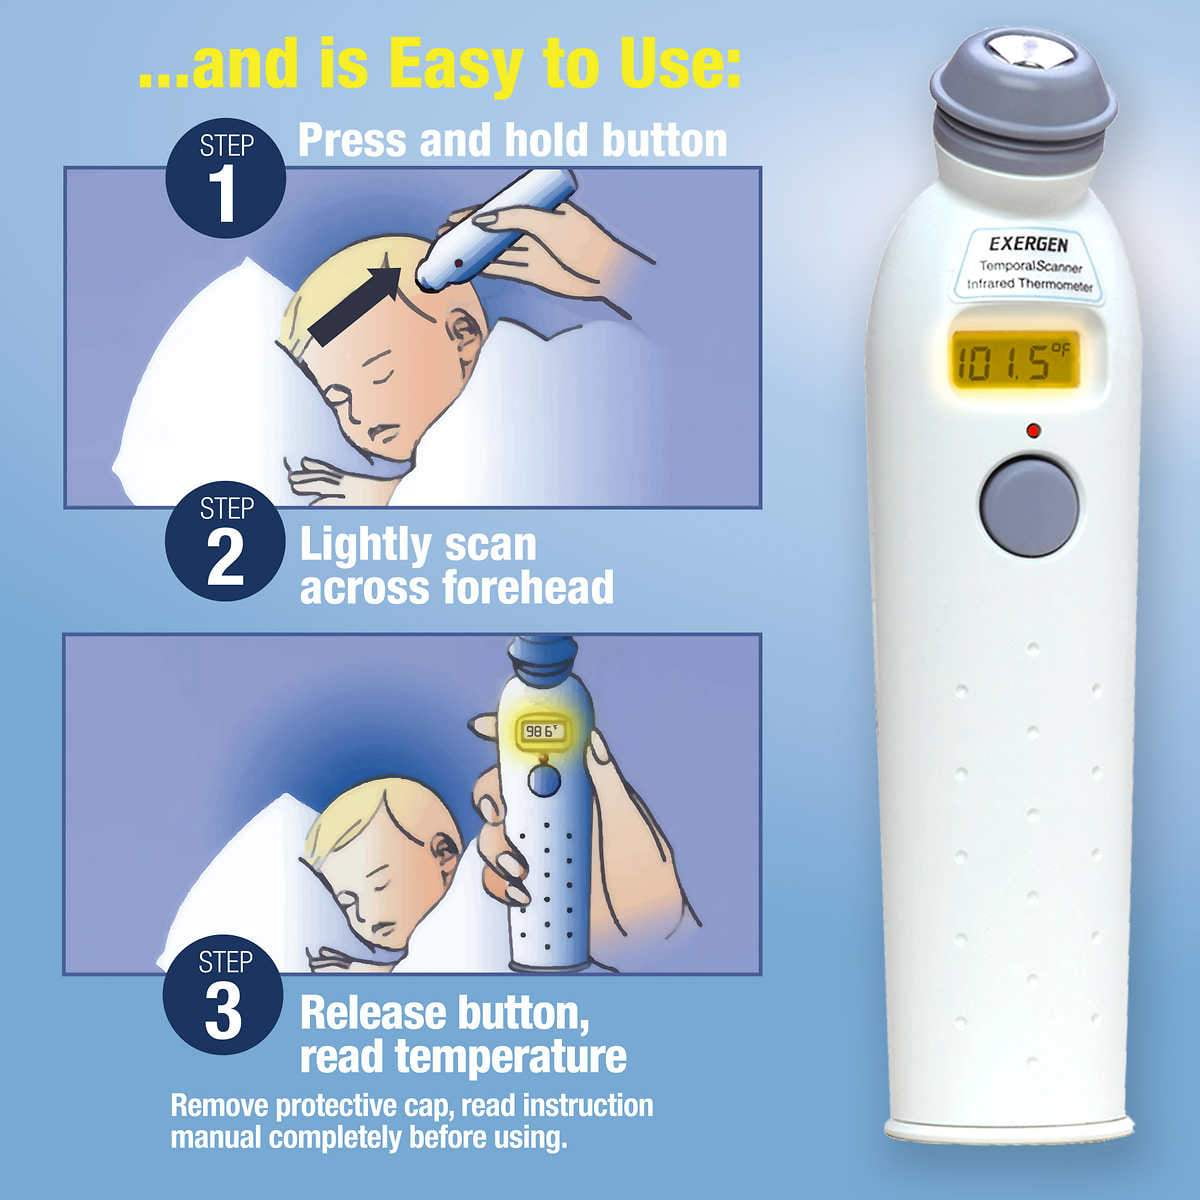 Procheck Fever Glow Thermometer, Dishwasher Safe - 1 Ea